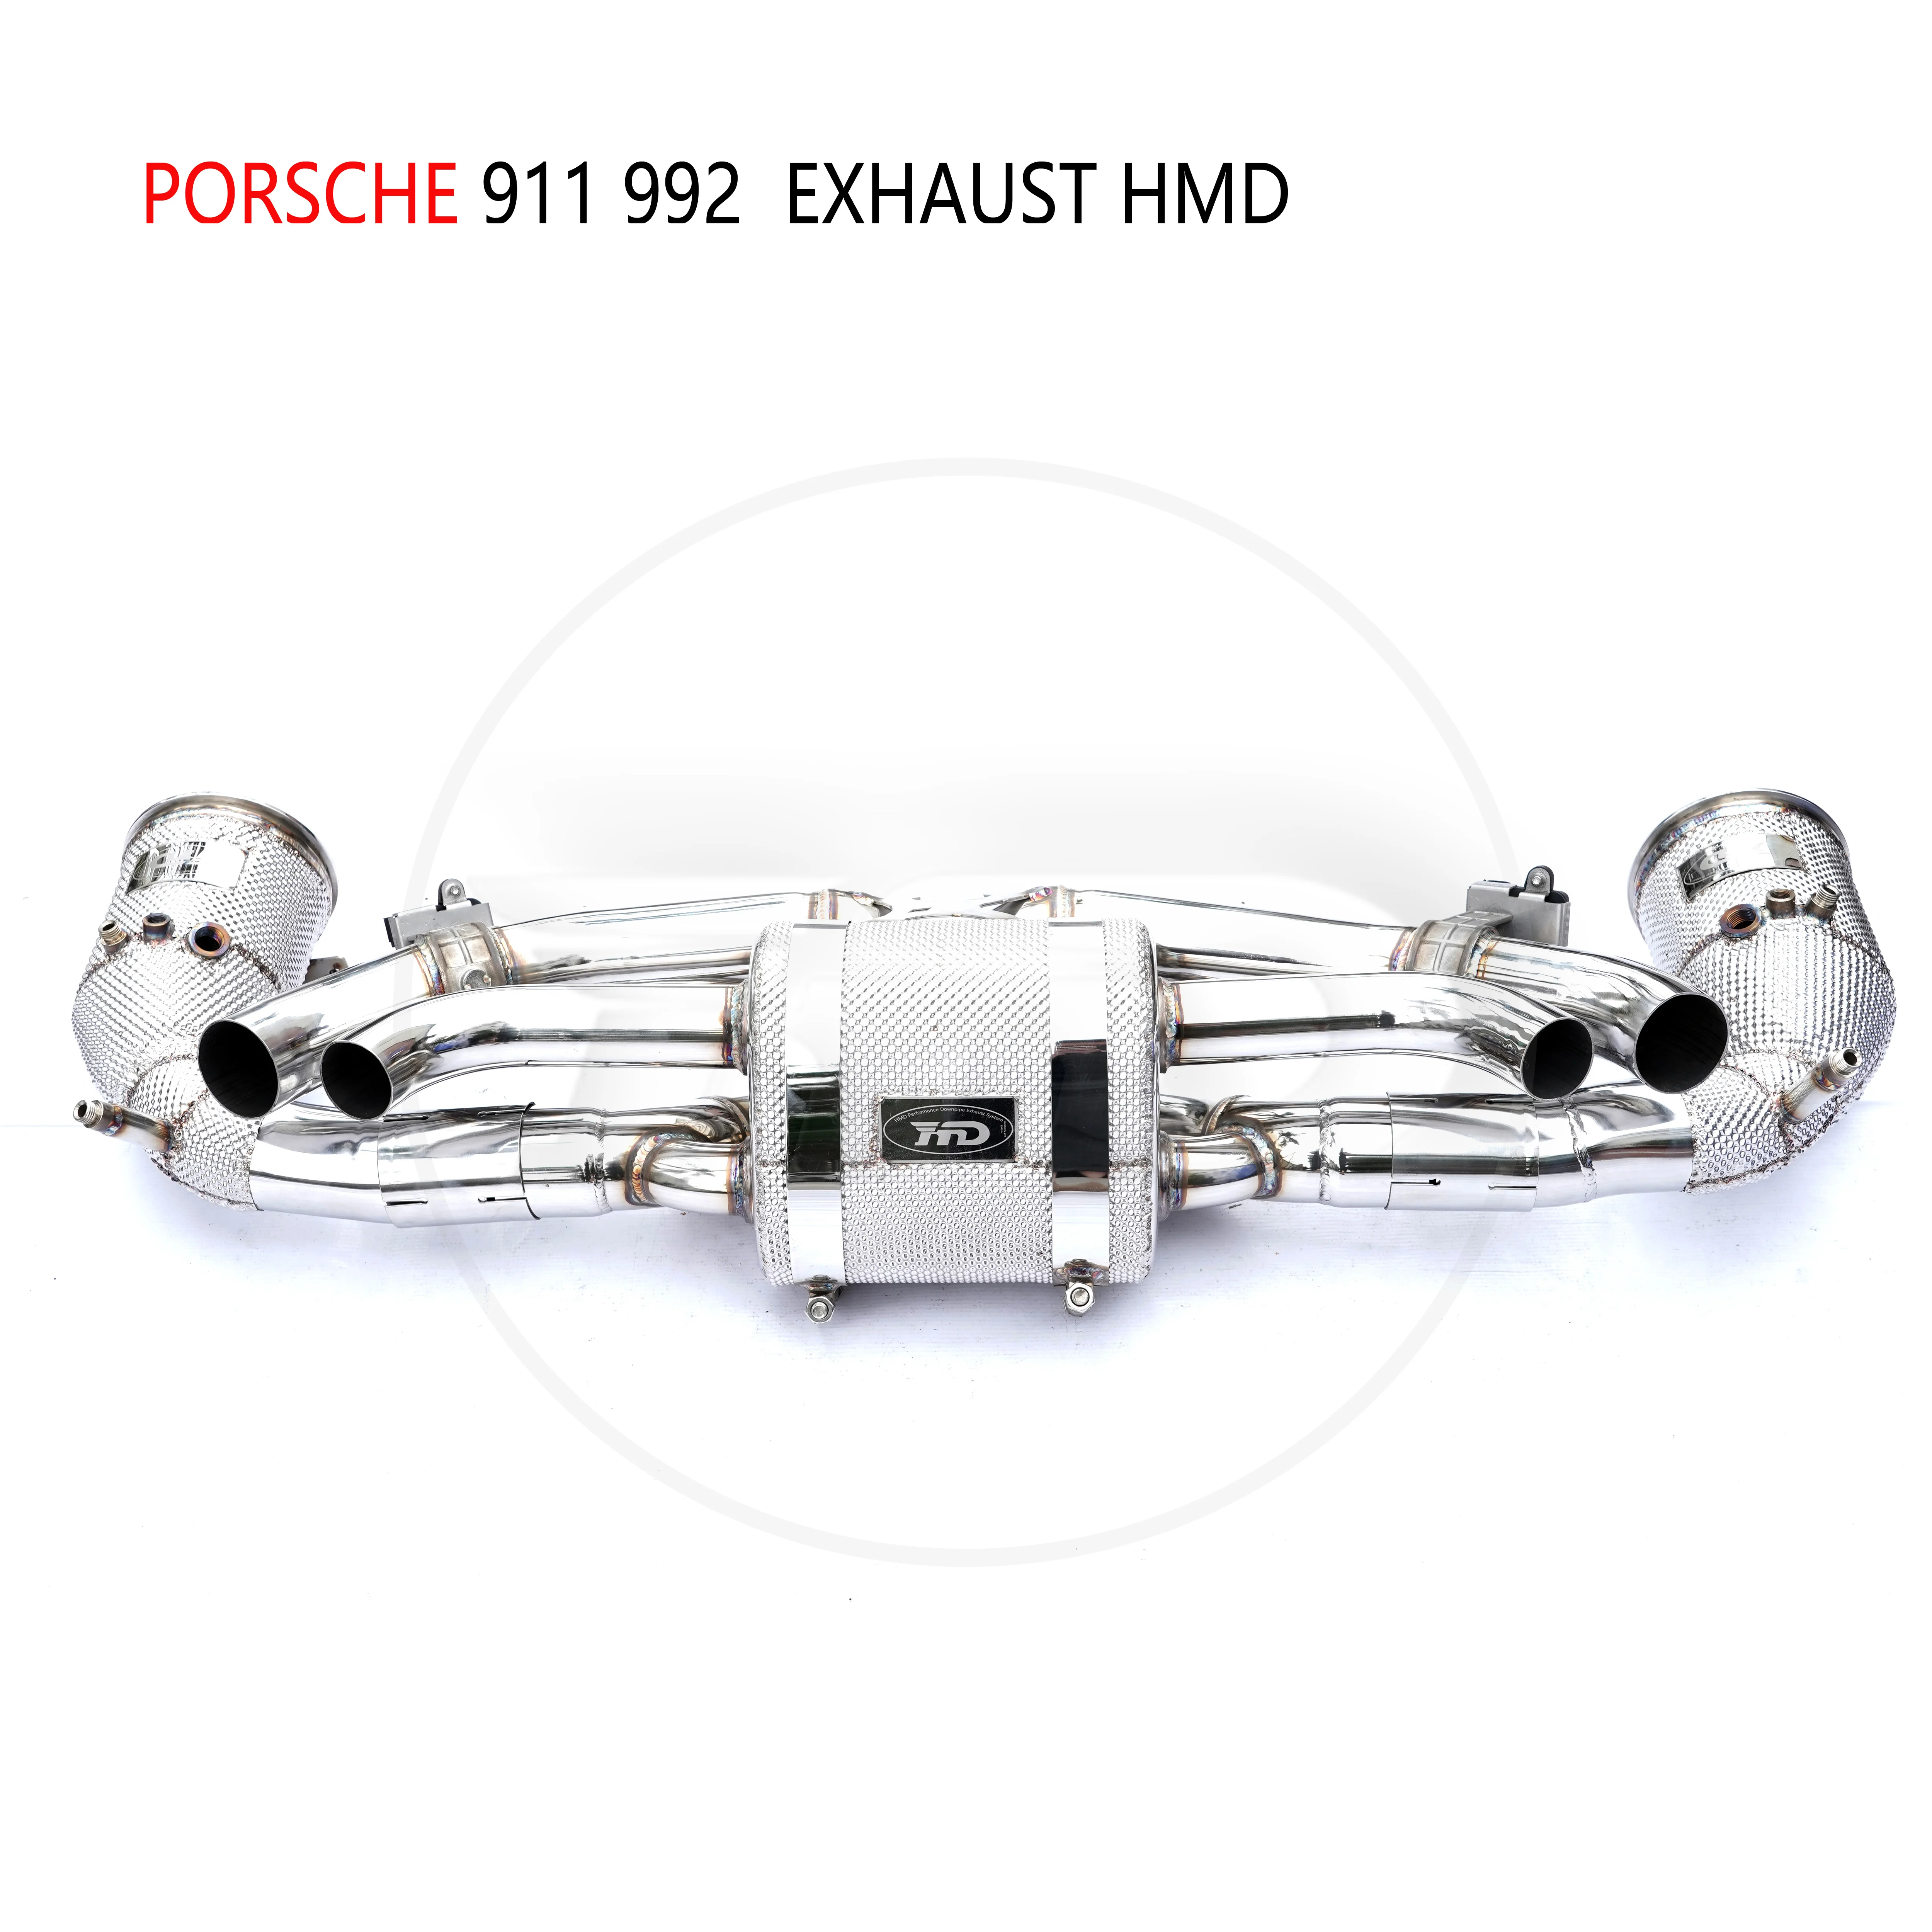 

HMD Stainless Steel Exhaust System for Porsche 911 992 Carrera S Auto Catback Modification Valve Peformance Downpipe With Cat